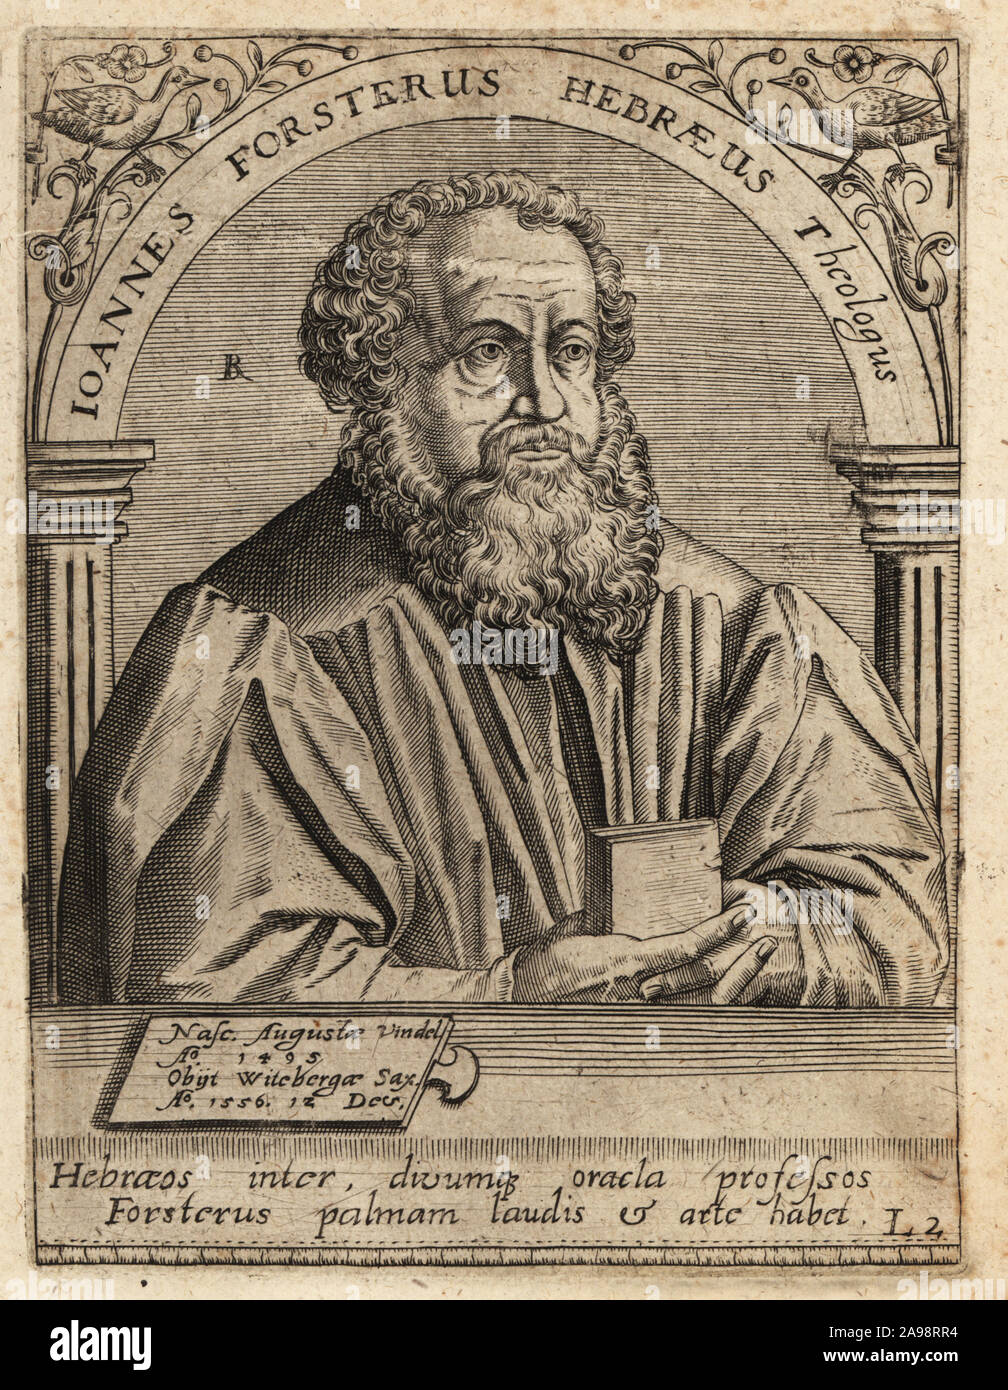 Johann Forster, 1496-1558, Lutheran theologian, Protestant reformer and professor of Hebrew. Ioannes Forsterus Hebraeus Theologus. Copperplate engraving by Johann Theodore de Bry from Jean-Jacques Boissard’s Bibliotheca Chalcographica, Johann Ammonius, Frankfurt, 1650. Stock Photo